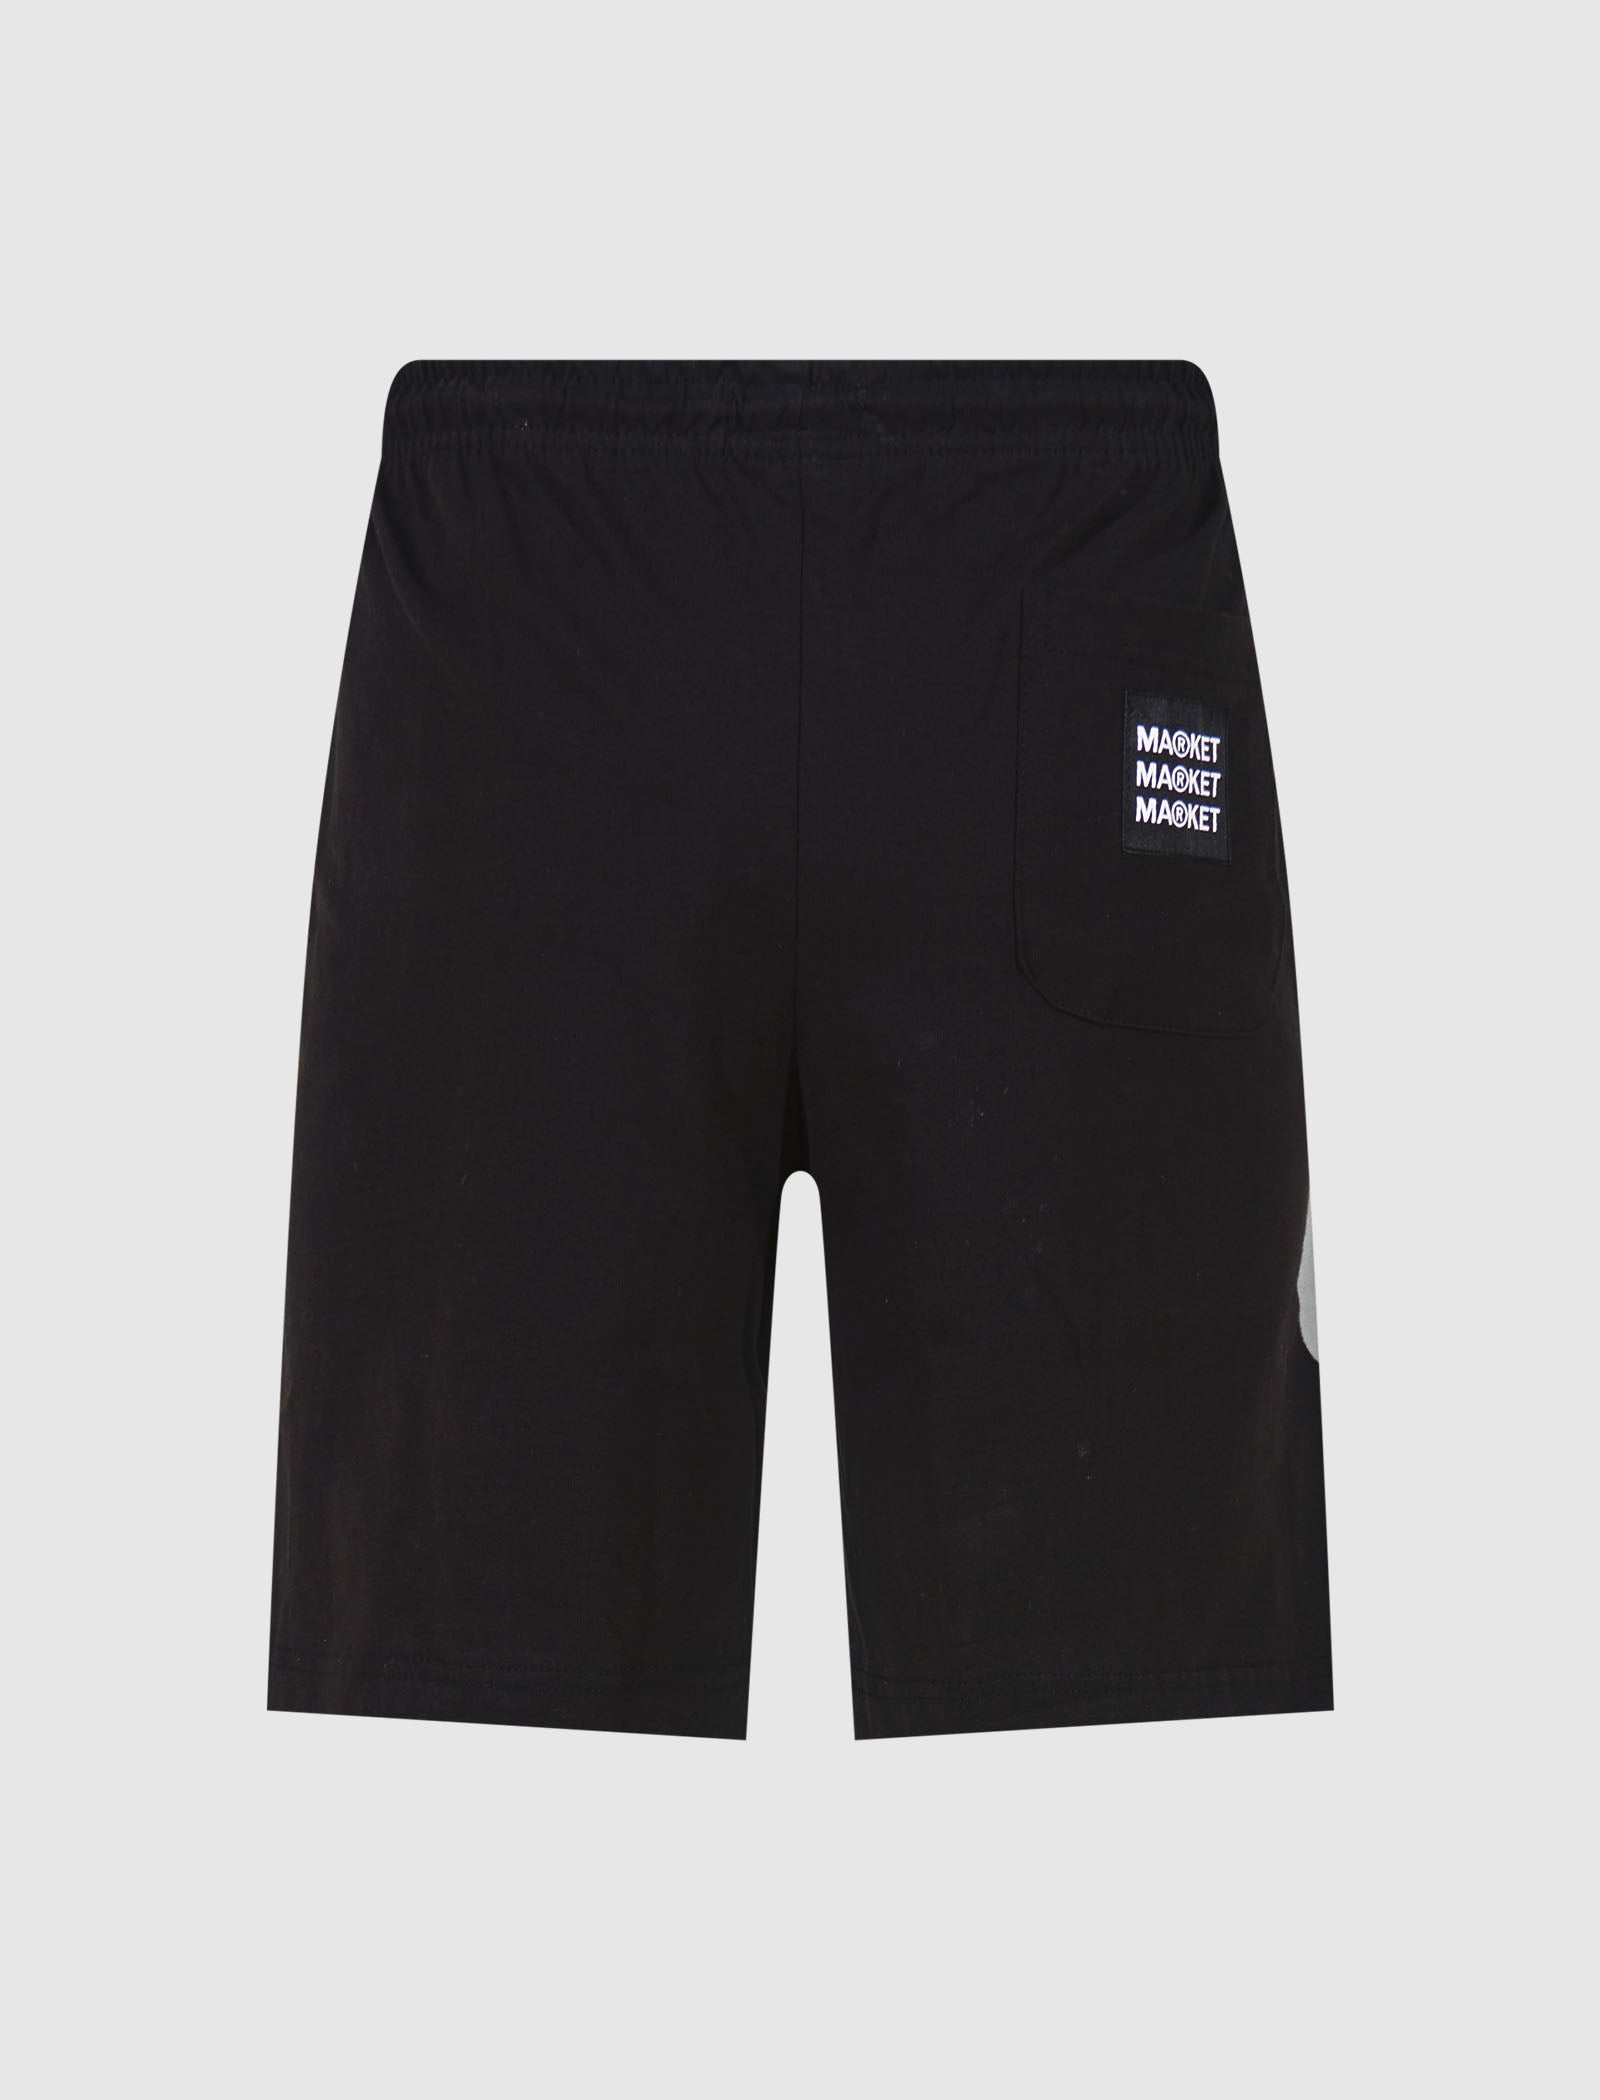 SMILEY IN THE NET 3M SHORTS